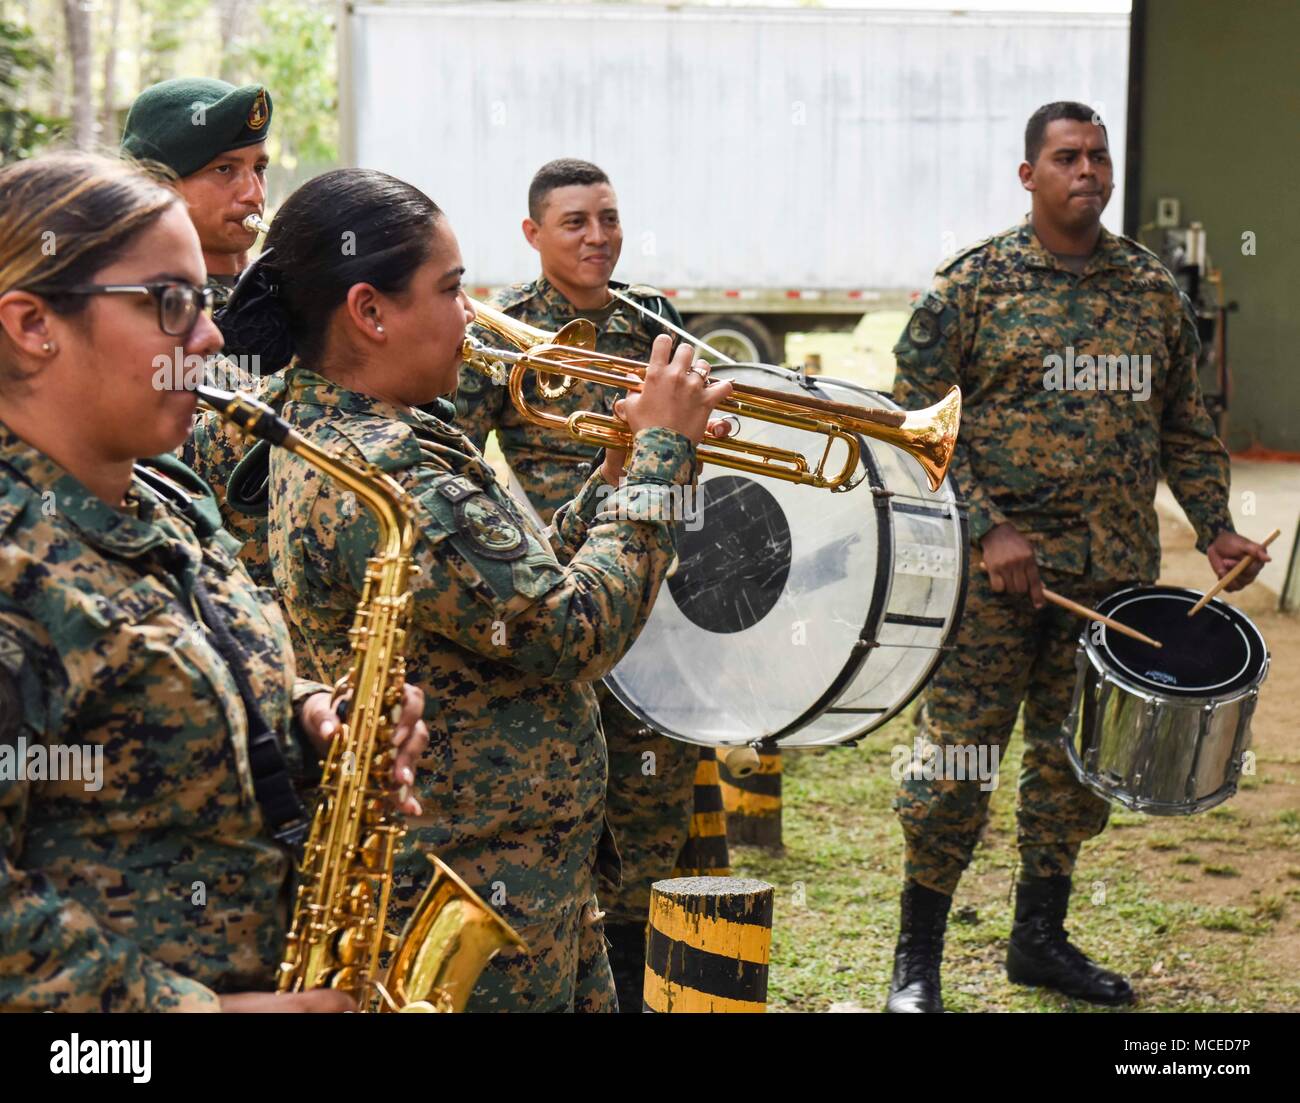 Members of the Panamanian National Border Service, known as SENAFRONT, play instruments during the opening ceremony of Exercise New Horizons 2018, April 11, 2018, in Meteti, Panama. Exercise New Horizons is a joint-service training exercise, focused on enhancing relations with partner nations and providing aid to local communities while providing training U.S. military members. During the exercise, U.S. military members will build three schools, one community center and a women’s health ward in the Meteti area. They will also work closely with Panamanian health providers bringing medical aid t Stock Photo